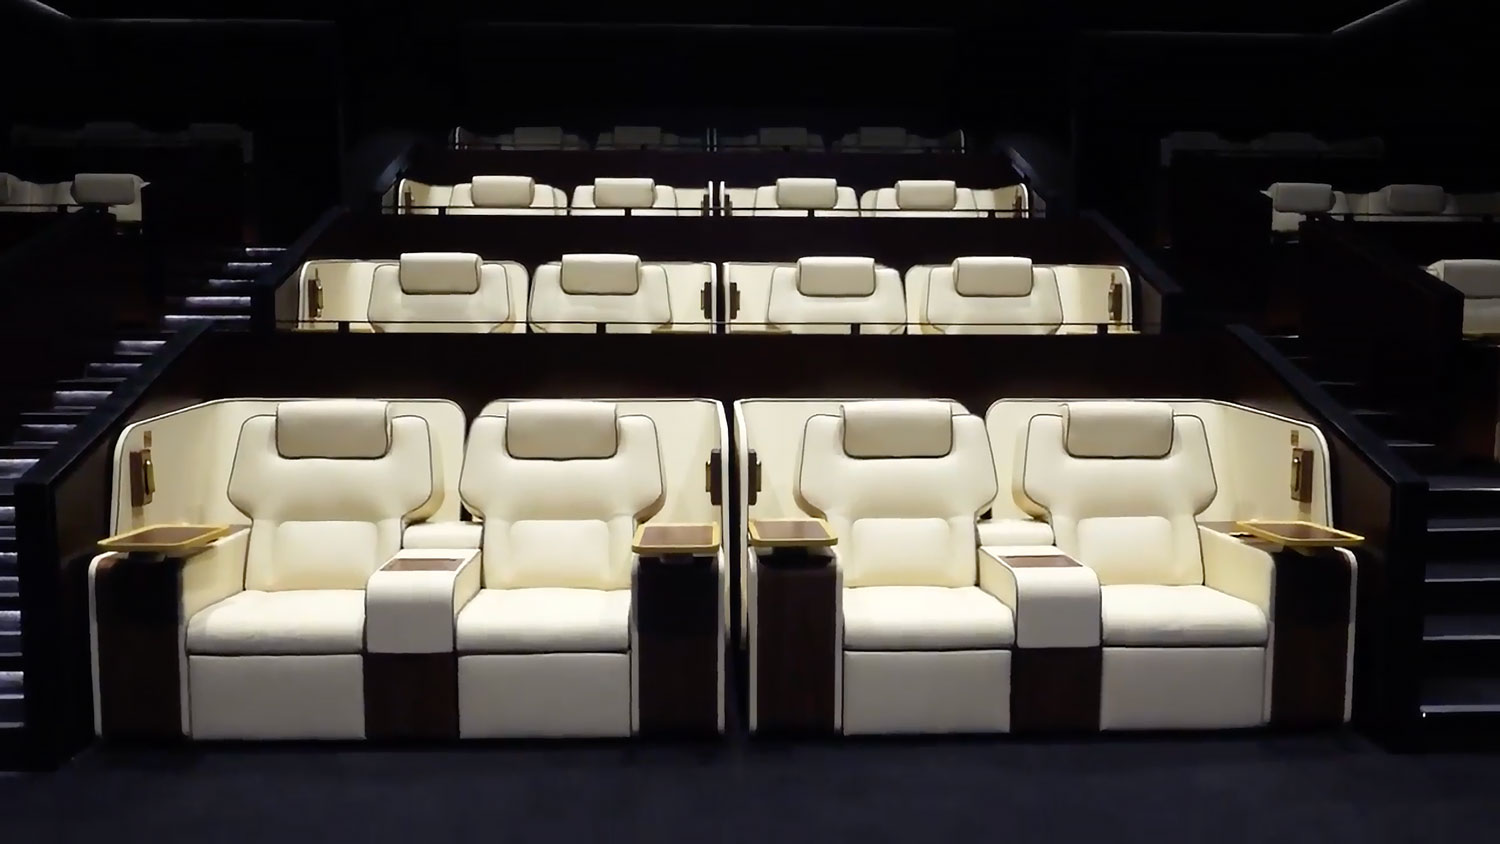 Most Luxurious Cinema Experience in the World 